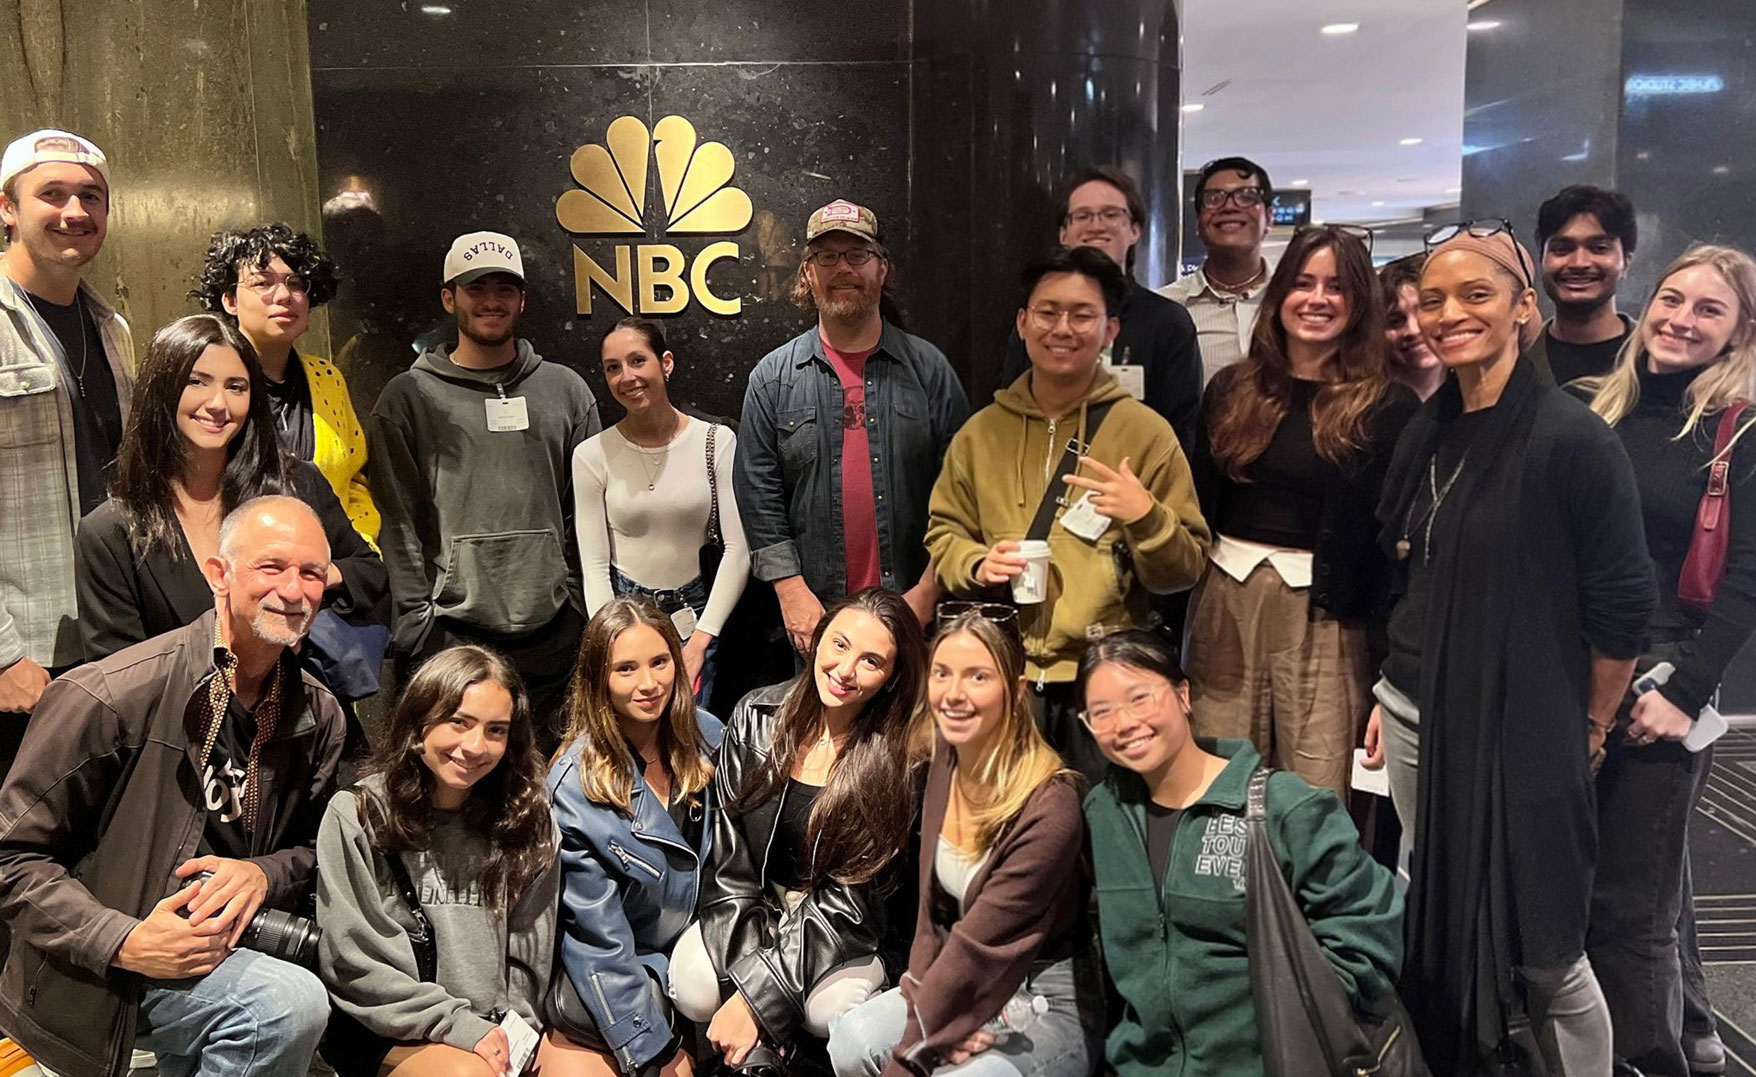 Advertising students pose during a behind-the-scenes tour of NBCUniversal in NYC